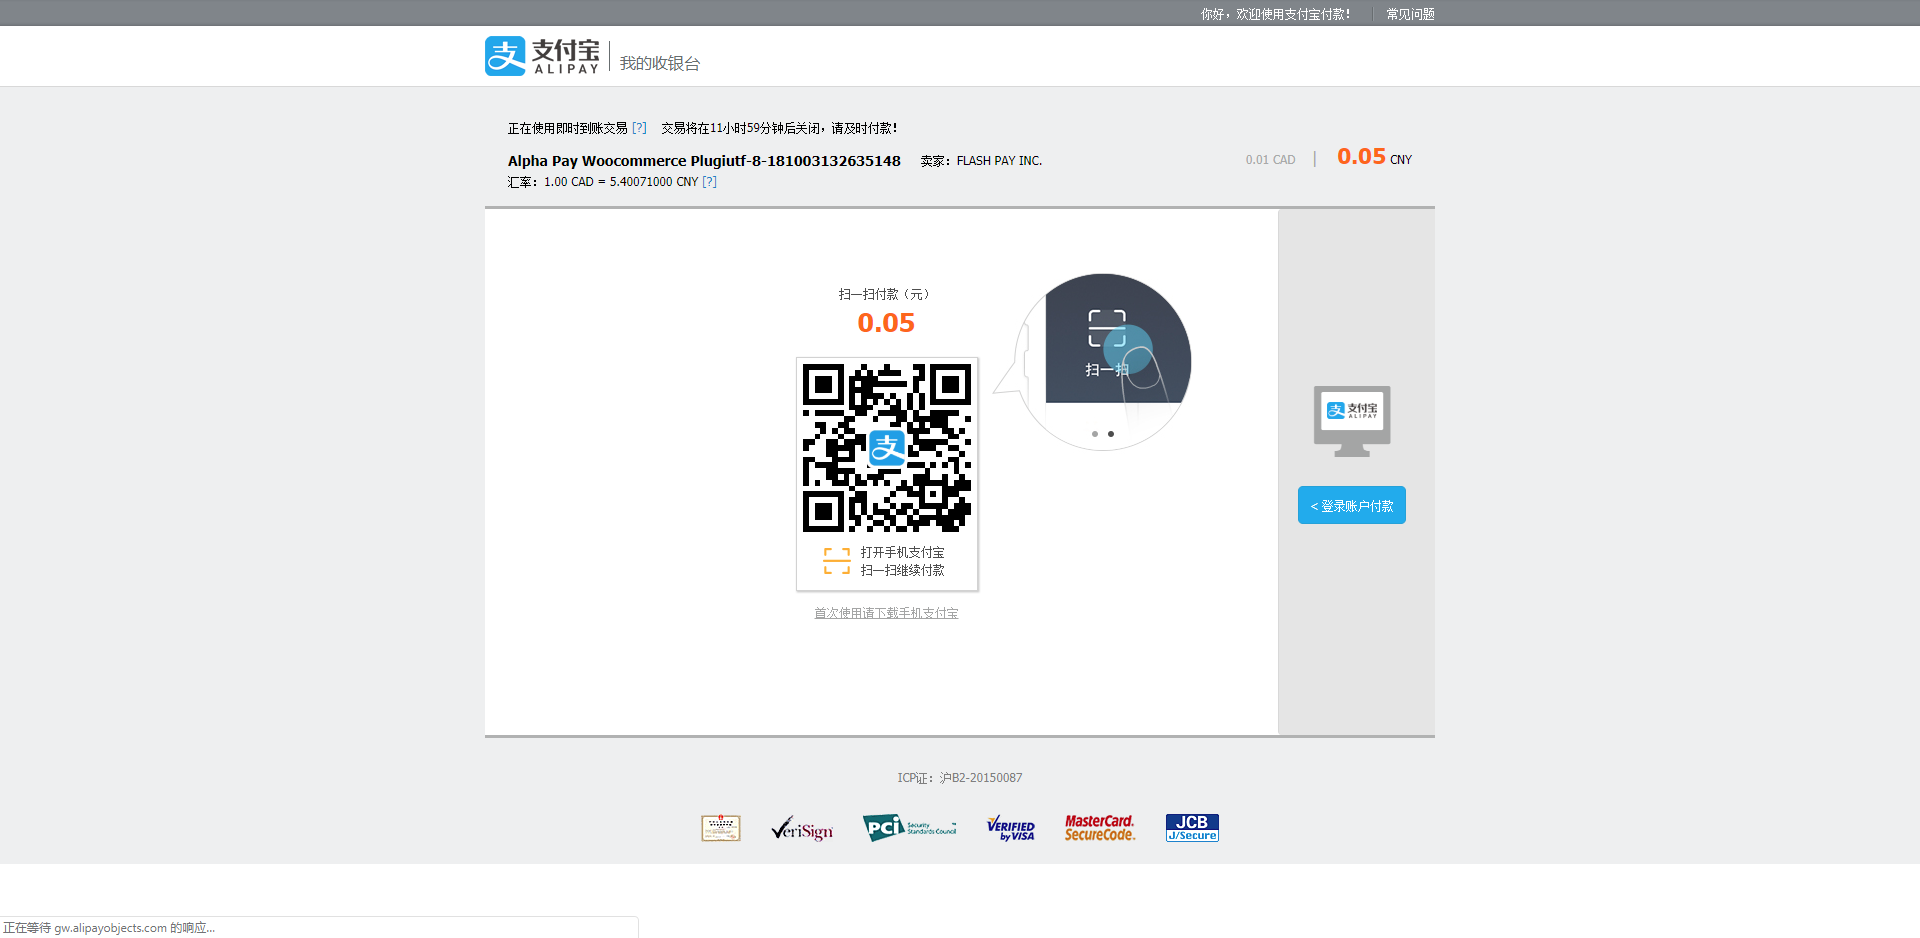 Alipay in Mobile Device